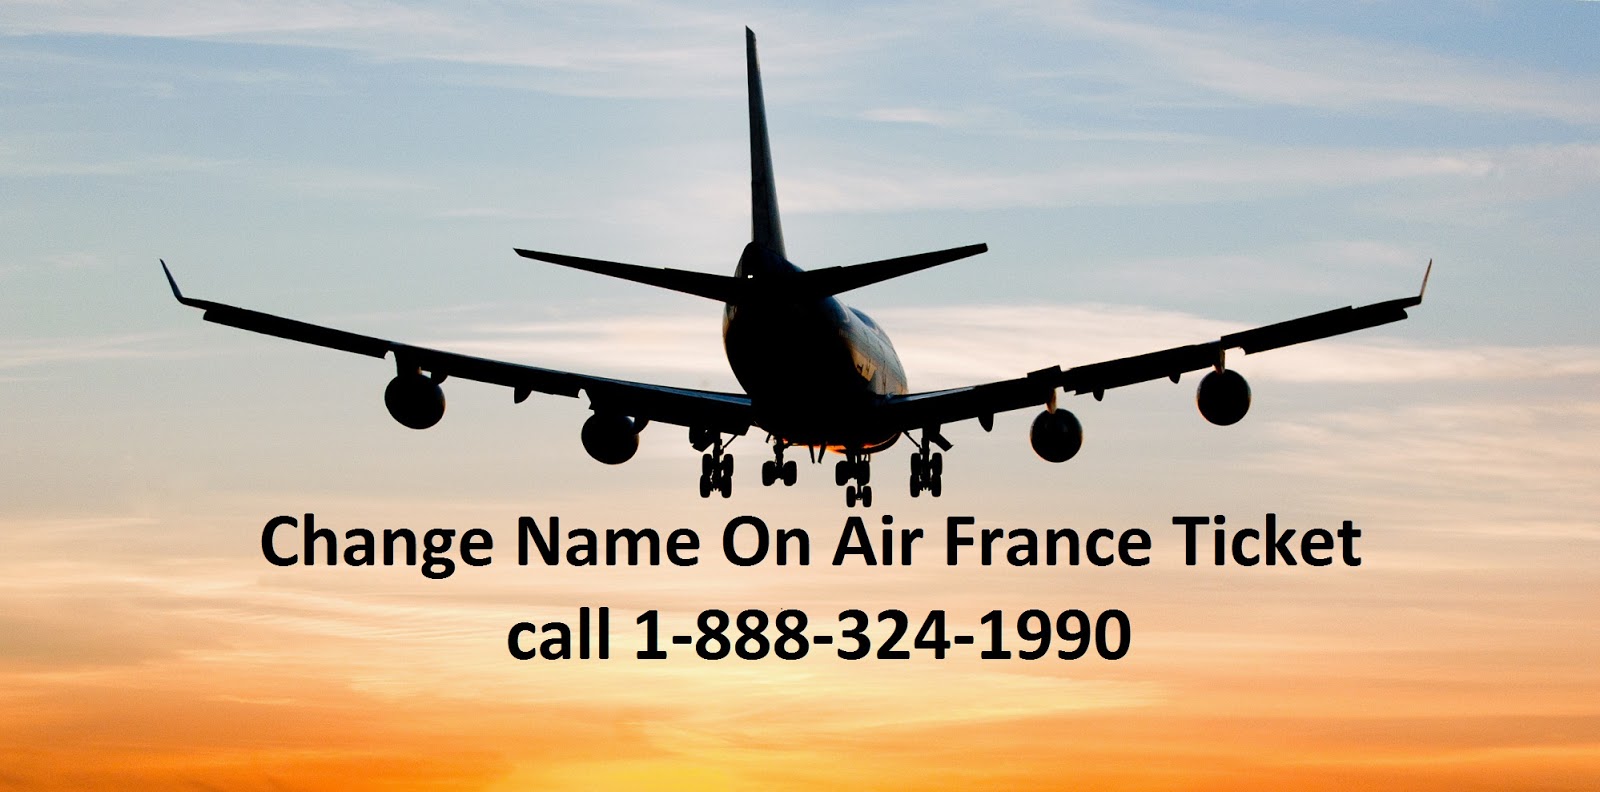 How To Change Name On Air France Ticket